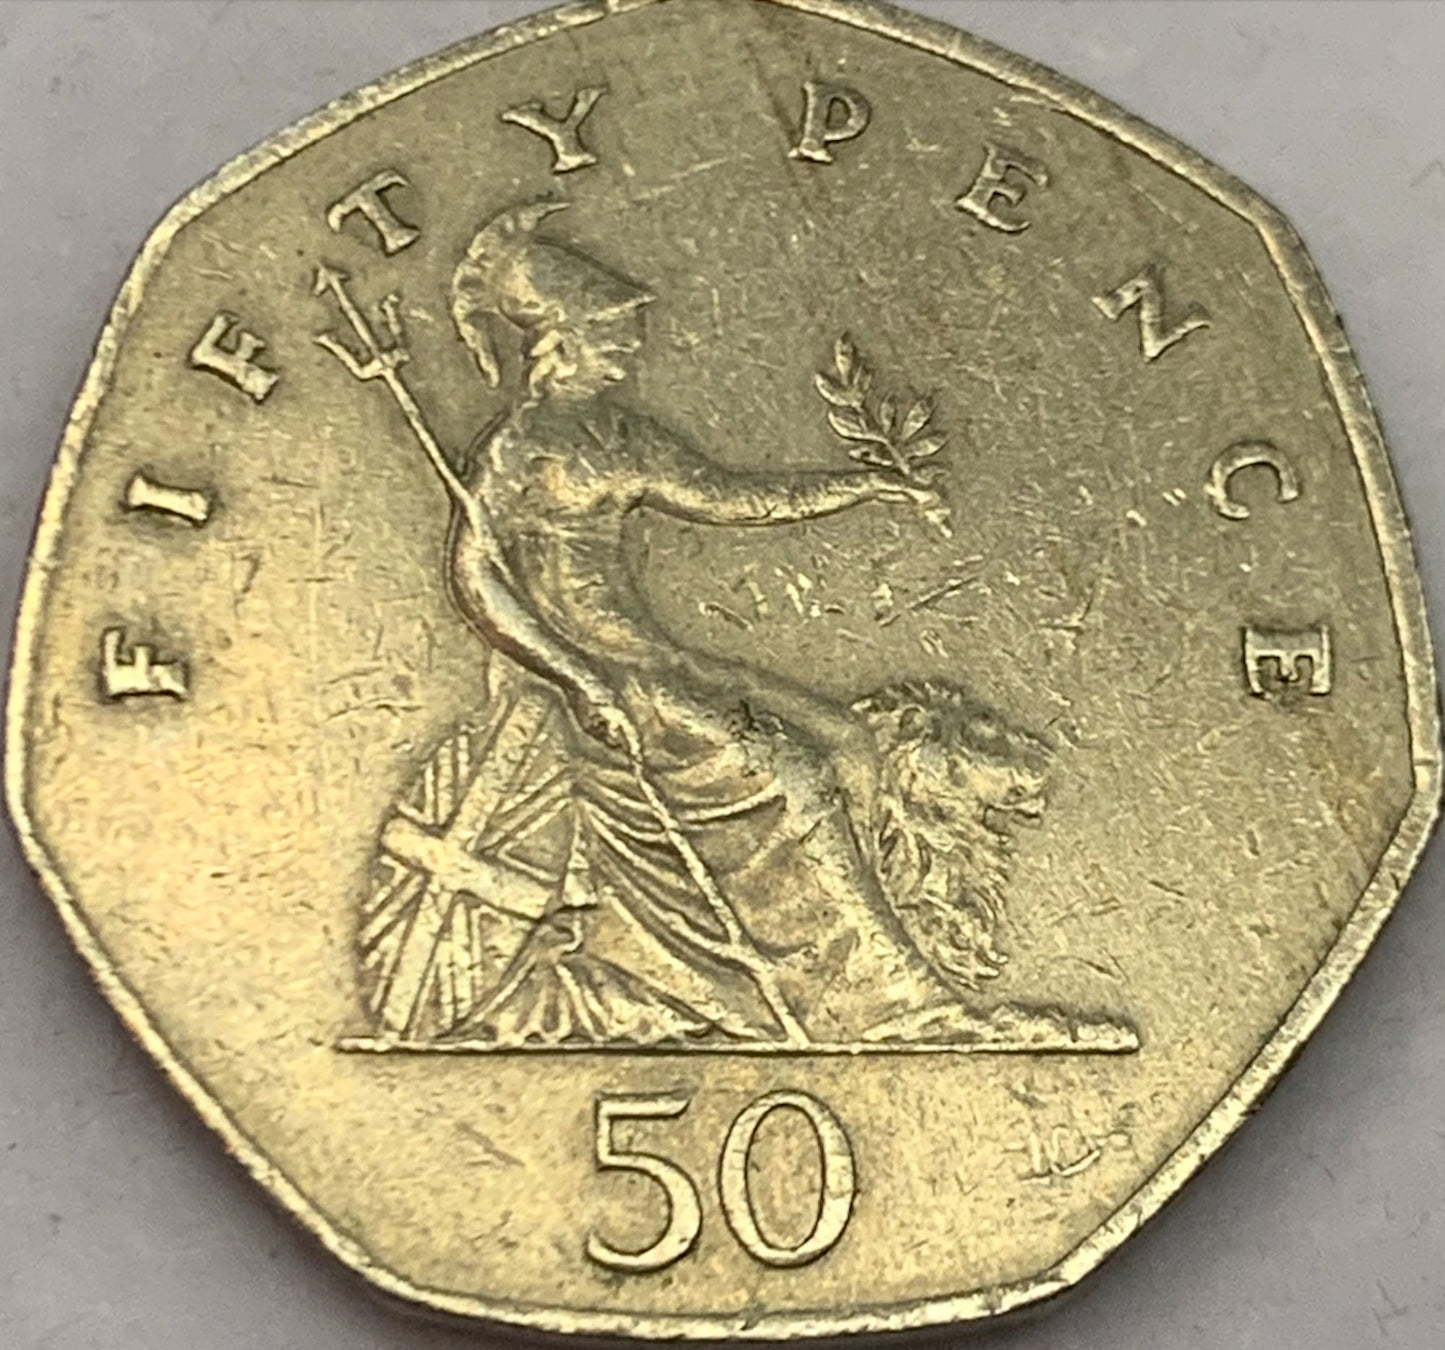 United Kingdom 50 New Pence, 1969: A Beautiful and Historic Coin from the Decimalisation Period